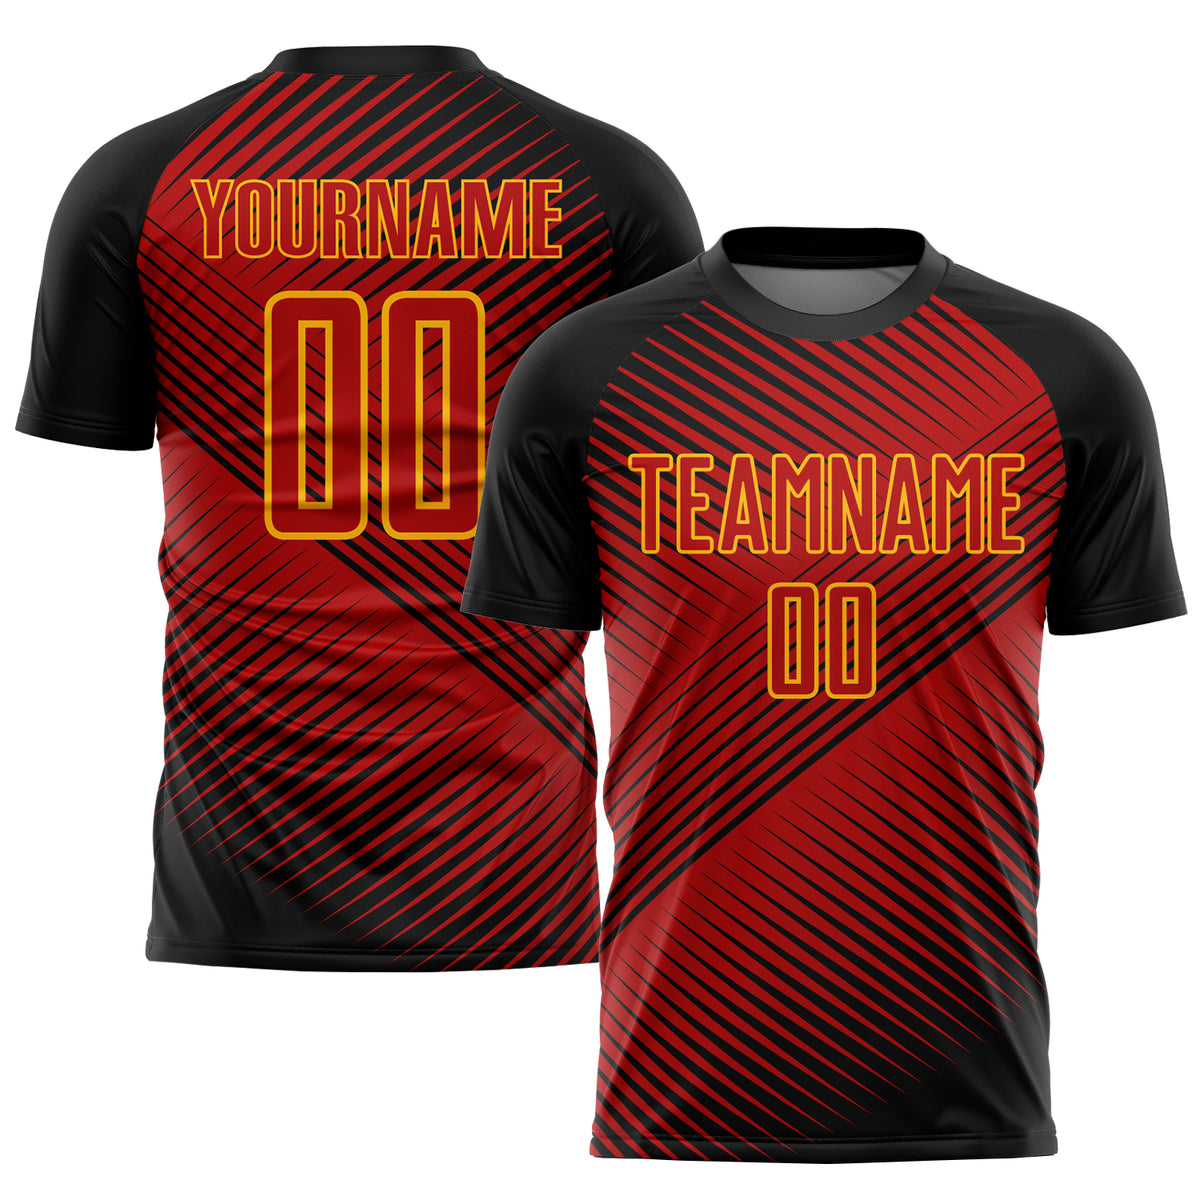 Buy Jersey Design - Black and Red Cricket Jersey Design